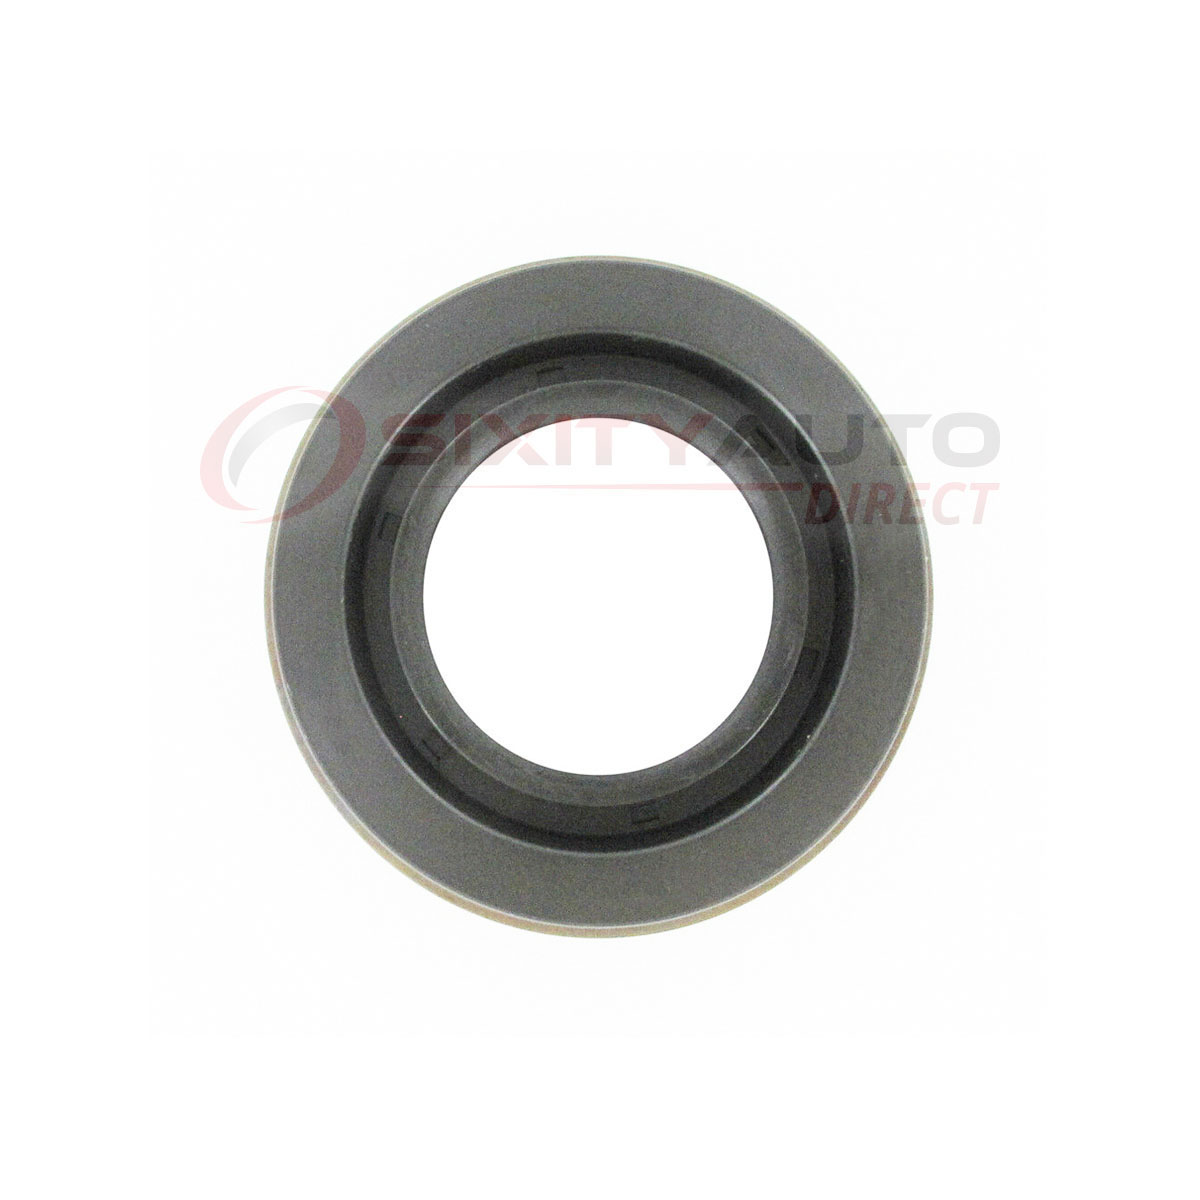 SKF Differential Pinion Seal for 2002-2010 Dodge Ram 1500 3.7L 3.9L 4 2002 Dodge Ram 1500 Rear Pinion Seal Replacement